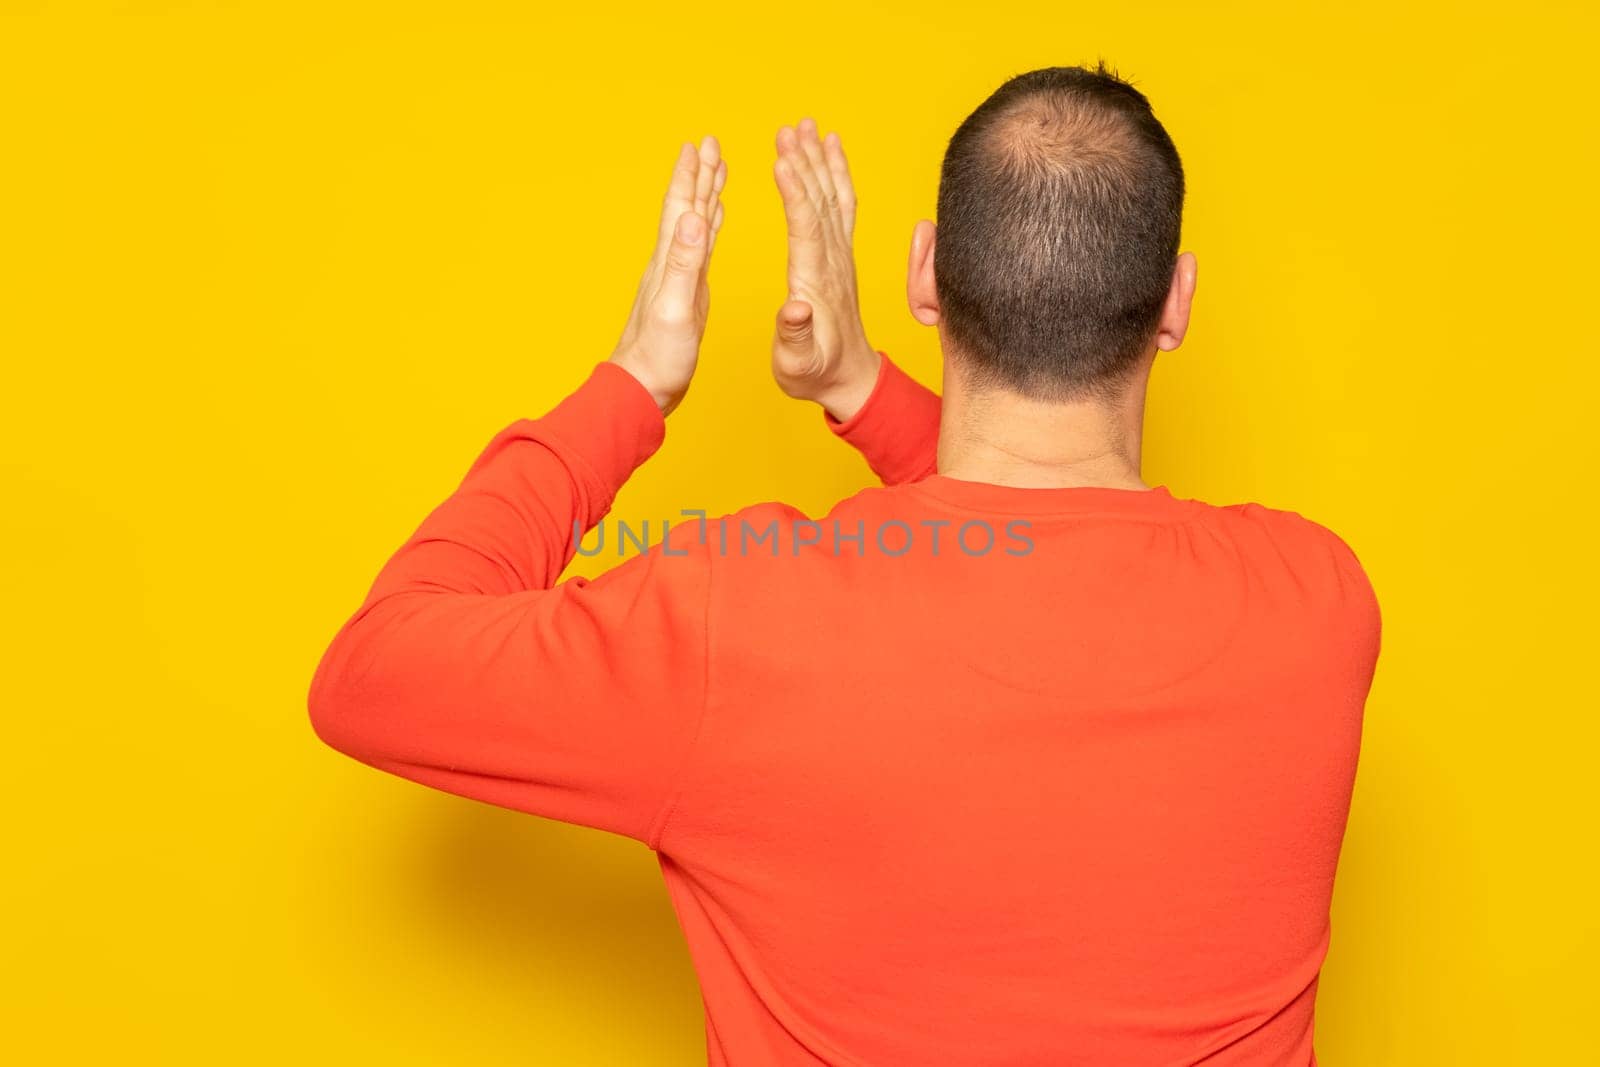 Half-bald man energetically clapping his back, he is excited about the spectacle he has just witnessed. Isolated on yellow background